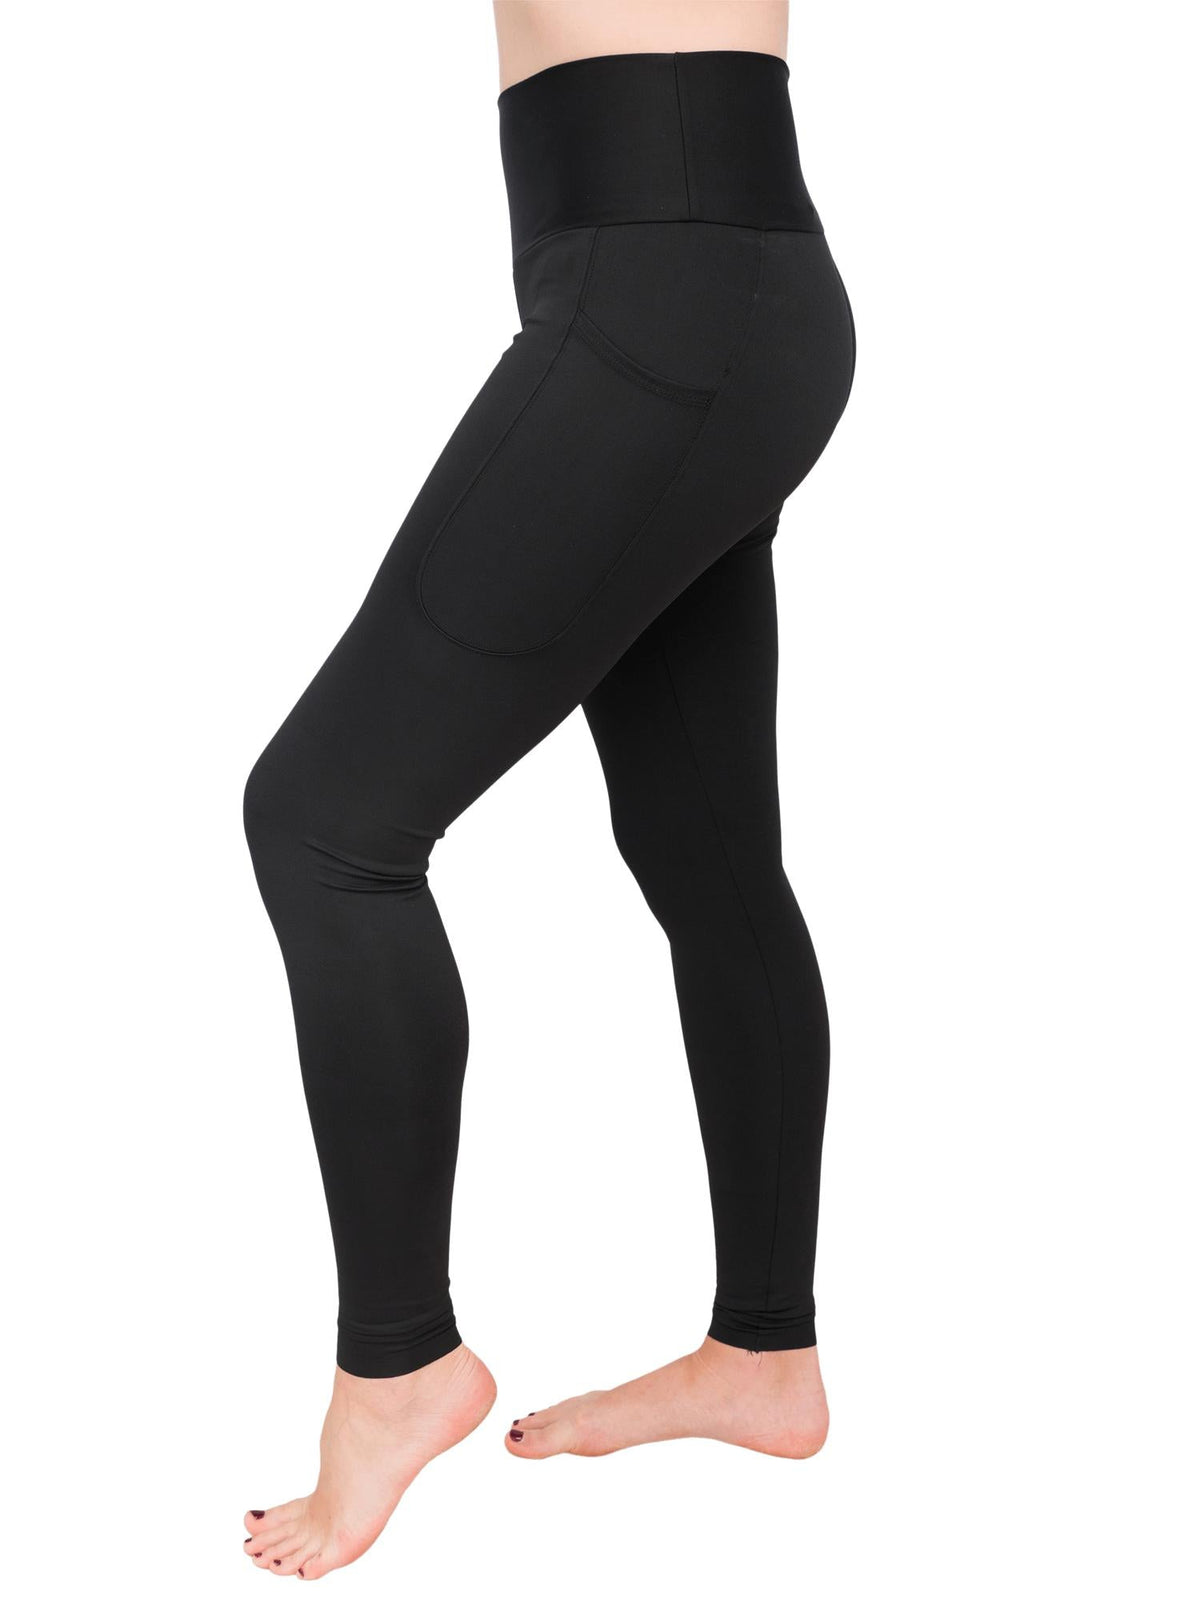 Model: Laura is our Chief Product Officer at Waterlust, a scuba diver, kiter and recreational yogi. She is 5’11, 147 lbs, 34B and is wearing a size M.